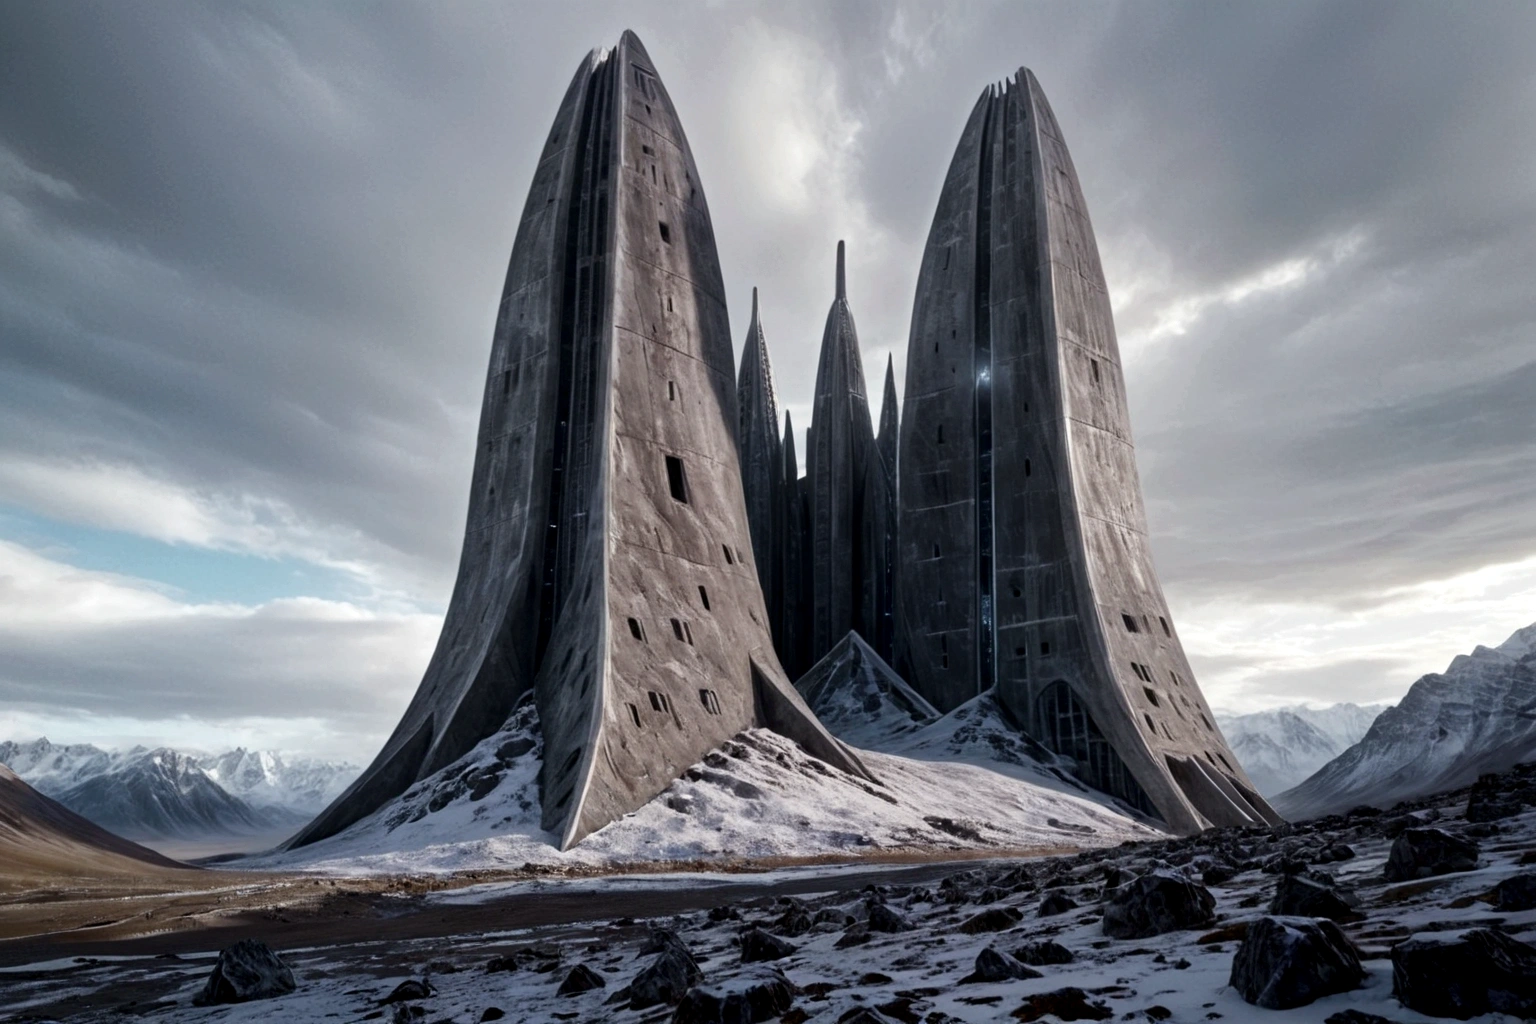 futuristic concrete fortress ON AN ALIEN PLANET STEEP AND INTRINSIC MOUNTAINS WITH SHARP ROCKS WITH SNOW AND ICE, EL CIELO TORMENTOSO APLOMADO, GRAY AND COLD HAS THE CLOUDS DESTROYED BY THE FREEZING WIND FROM THE POLE, IMAGEN HIPER REALISTA, MAXIMUM DEPTH OF FIELD, MAXIMUM HDR 4K RESOLUTION, PERSPECTIVA PERFECTA PARA fortaleza alien
